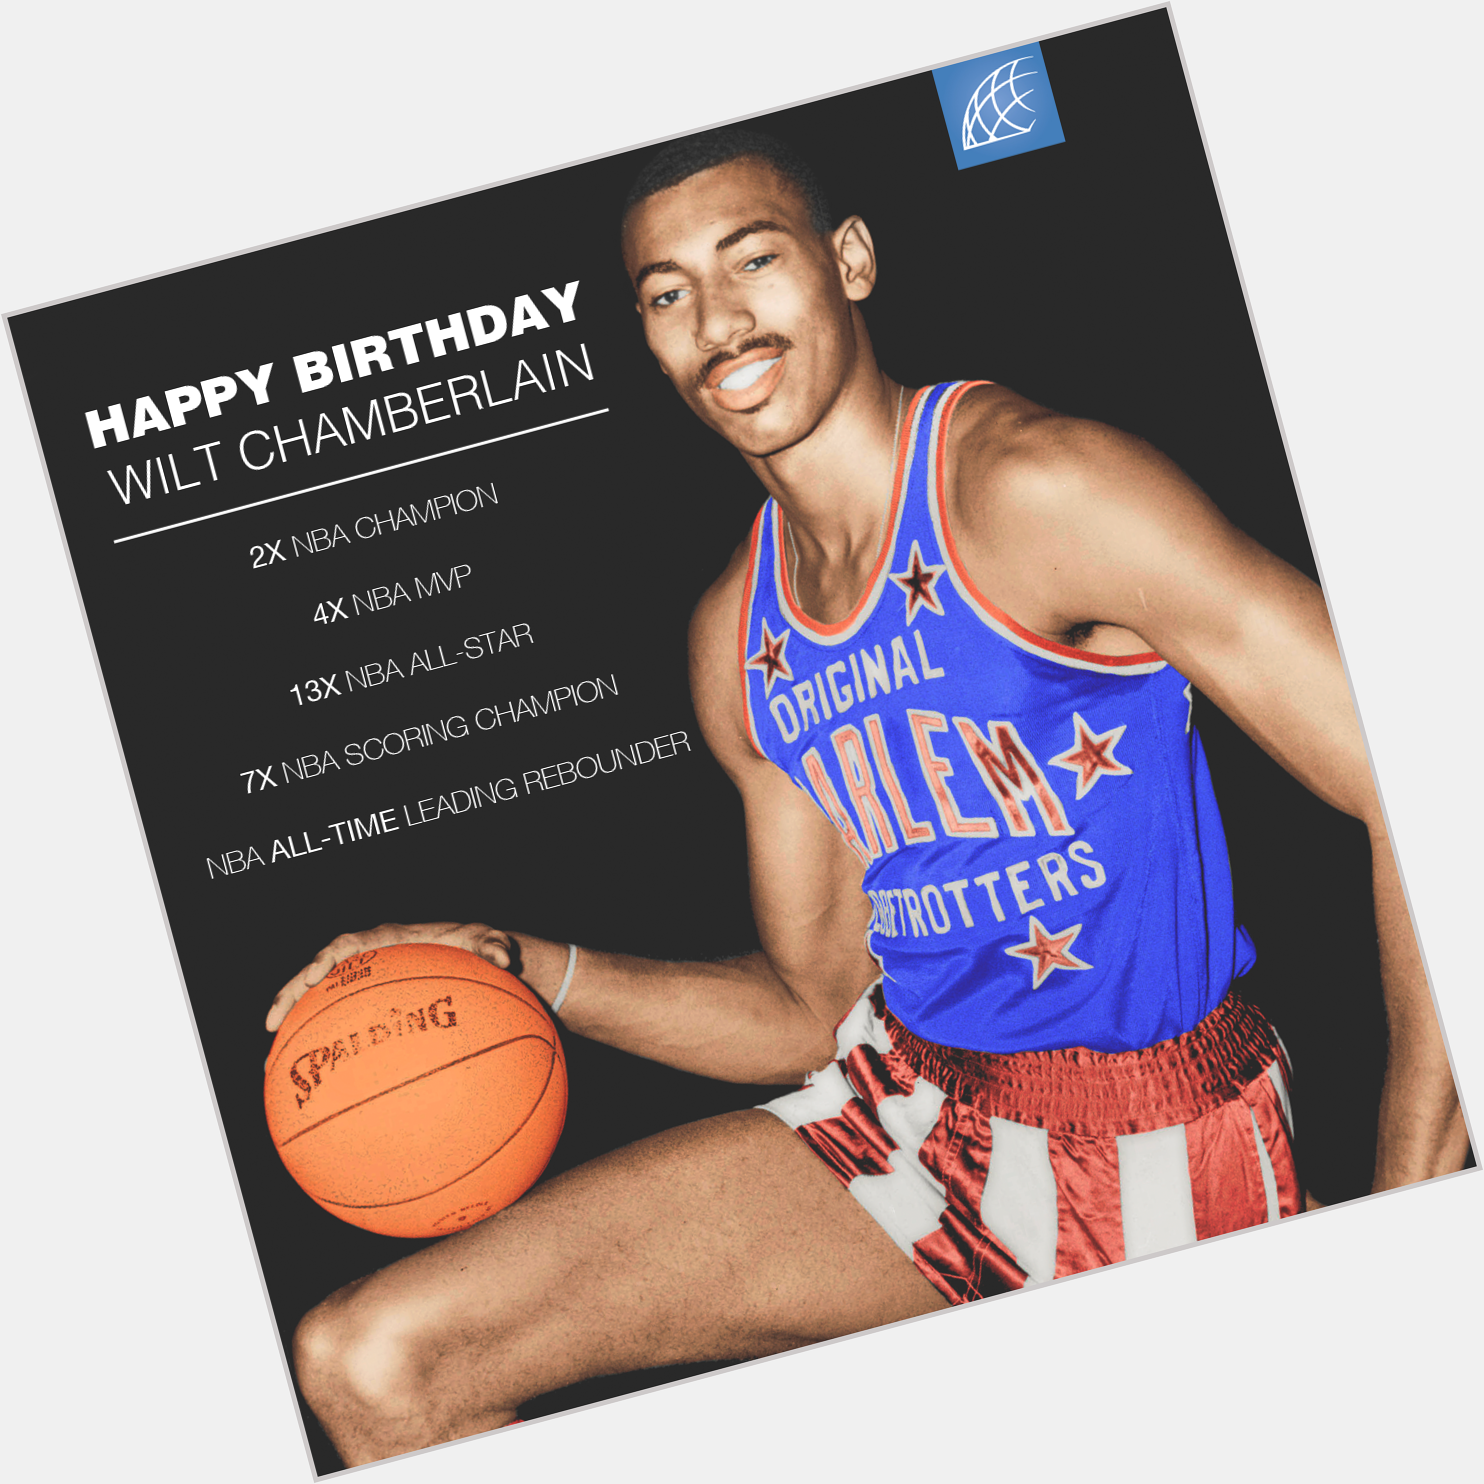 Wilt Chamberlain never fouled out of a game in his professional career. Happy Birthday!  